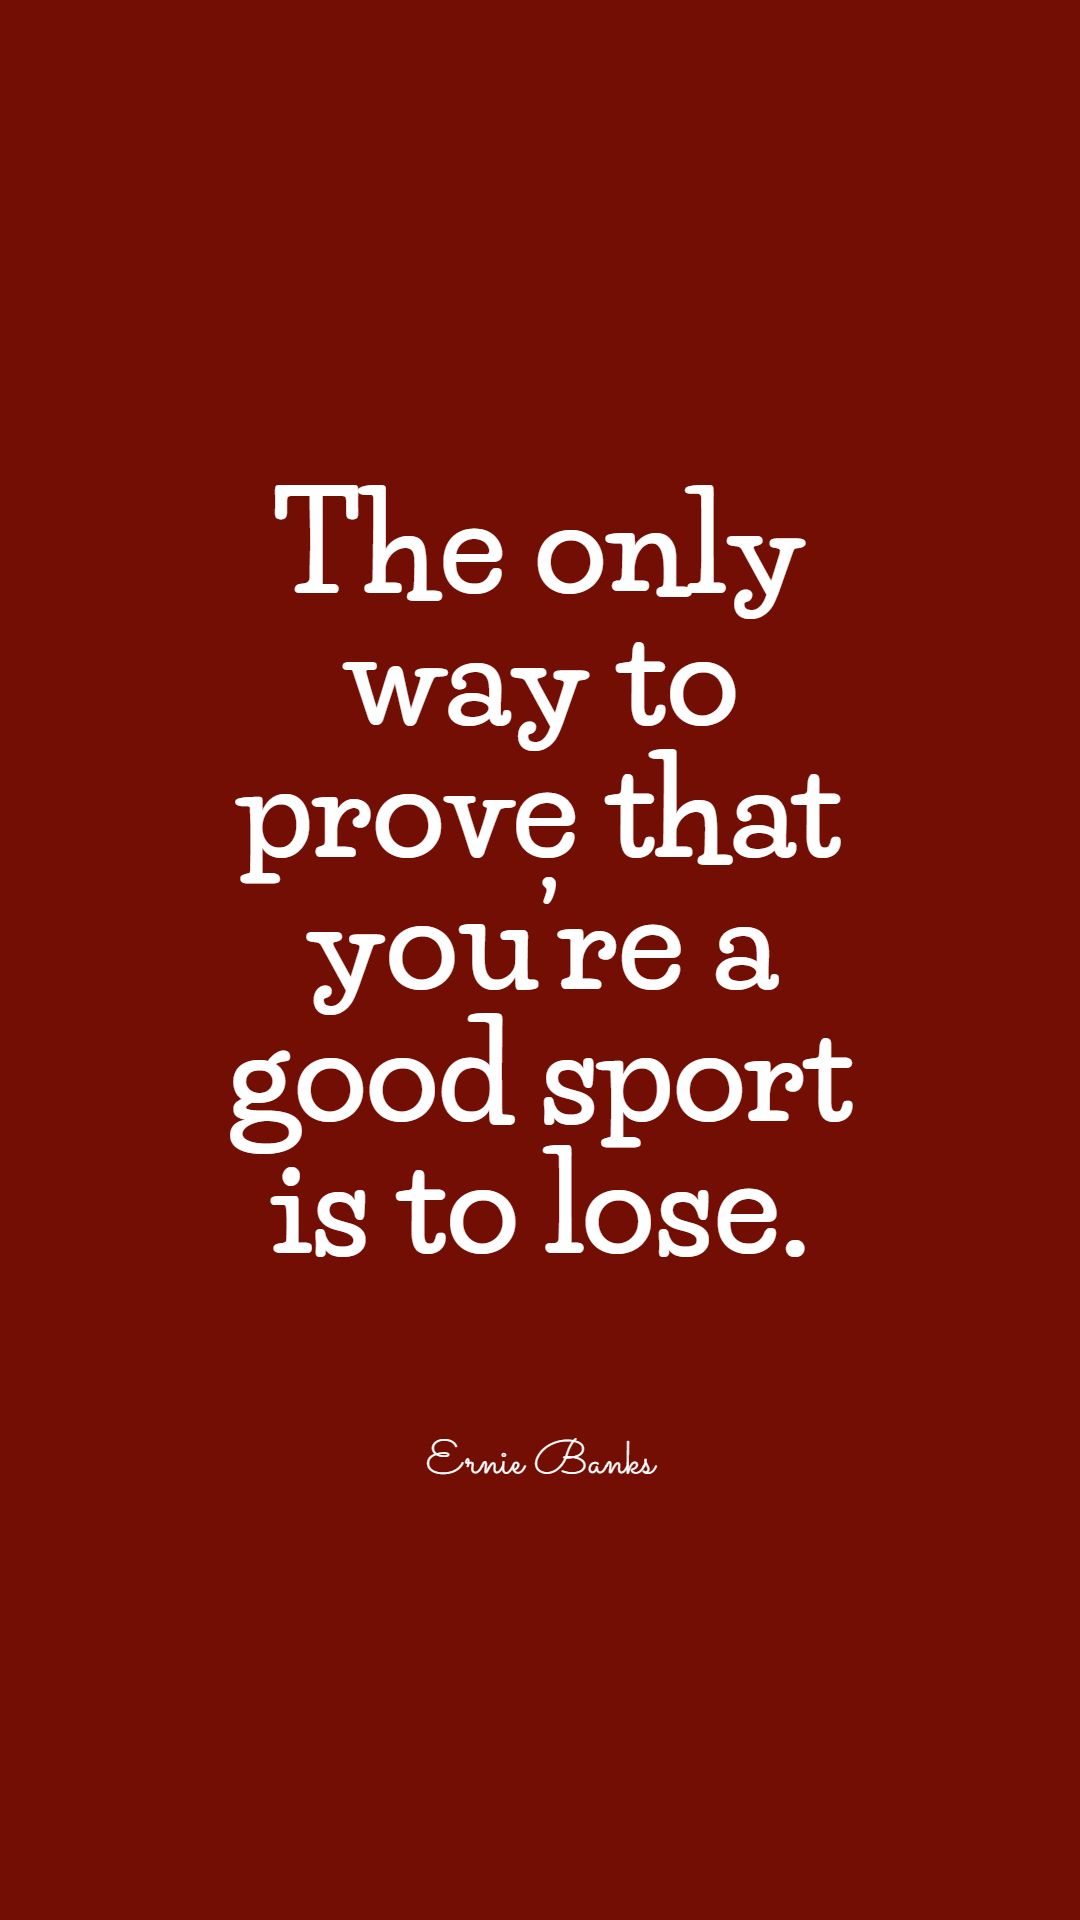 The only way to prove that you’re a good sport is to lose.